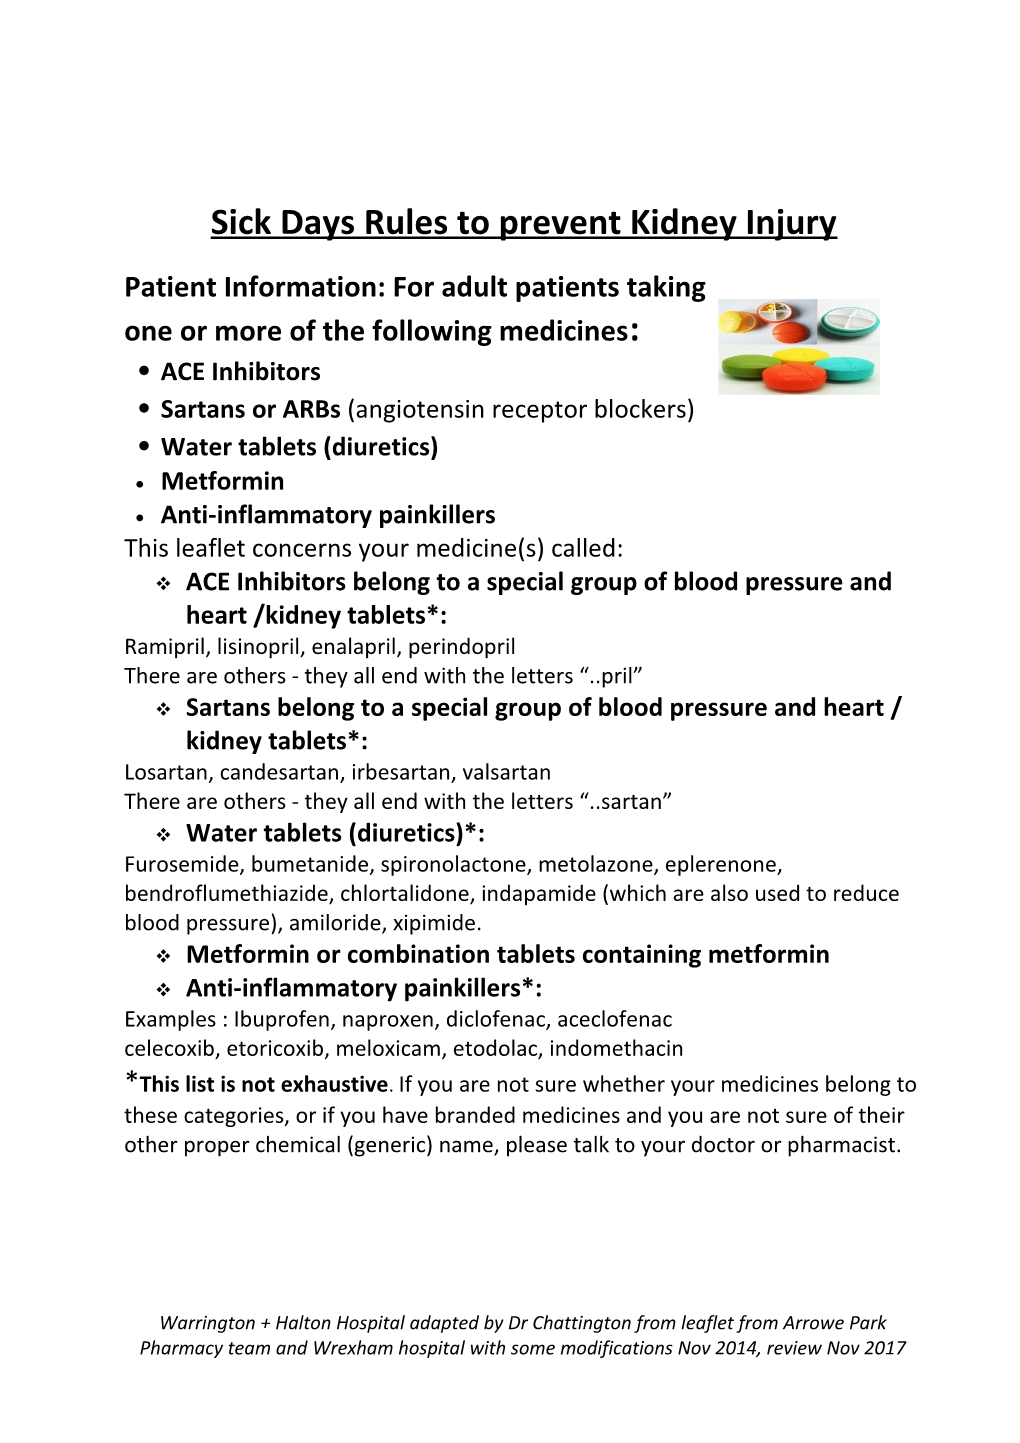 Sick Days Rules to Prevent Kidney Injury